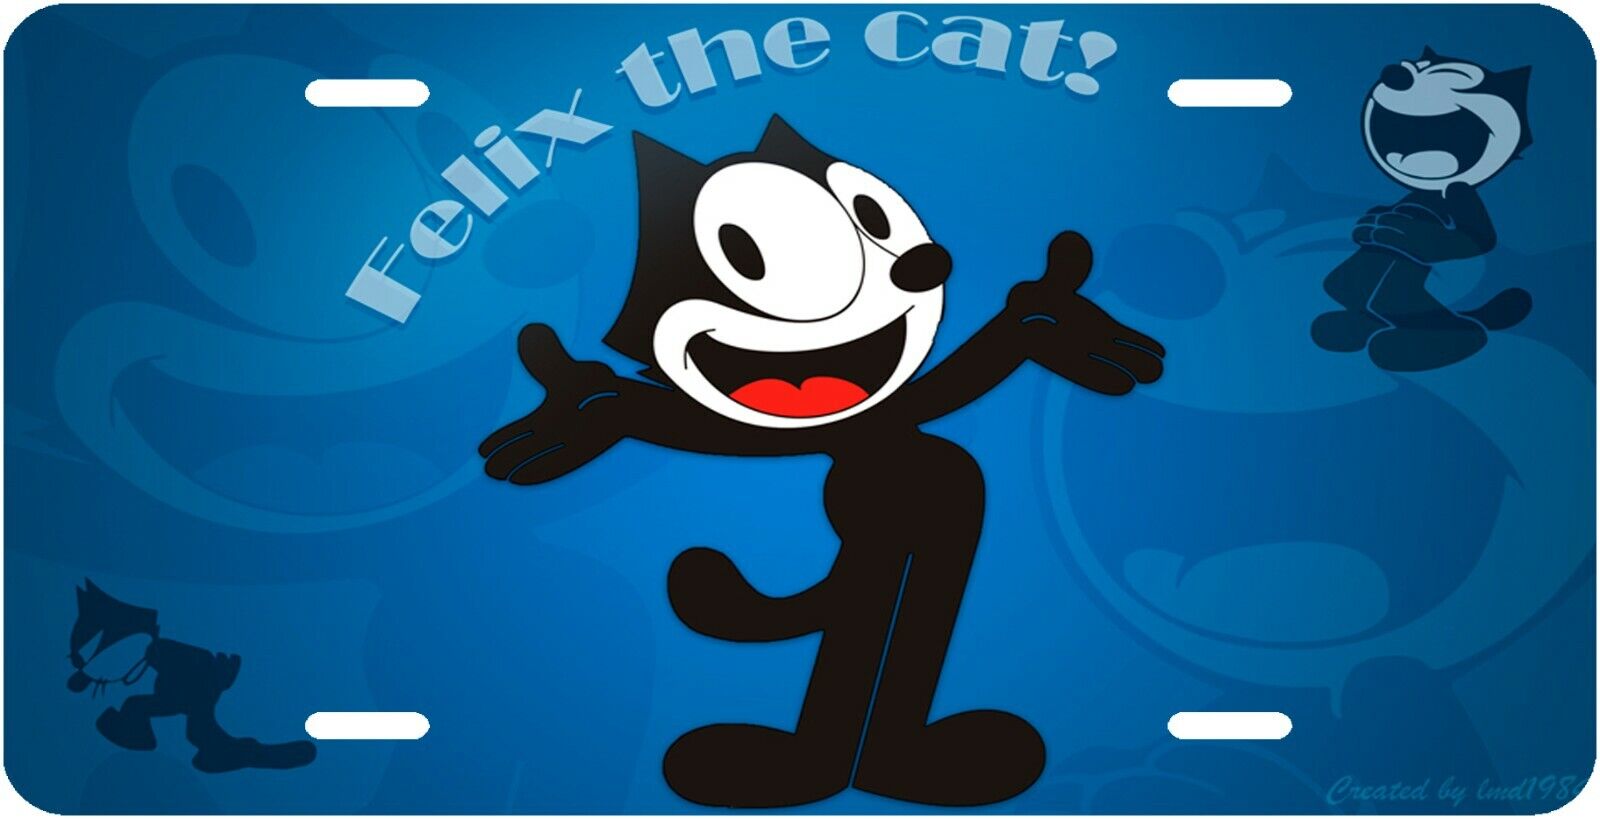 FELIX THE CAT   NOVELTY VANITY LICENSE PLATE MADE IN U.S.A.